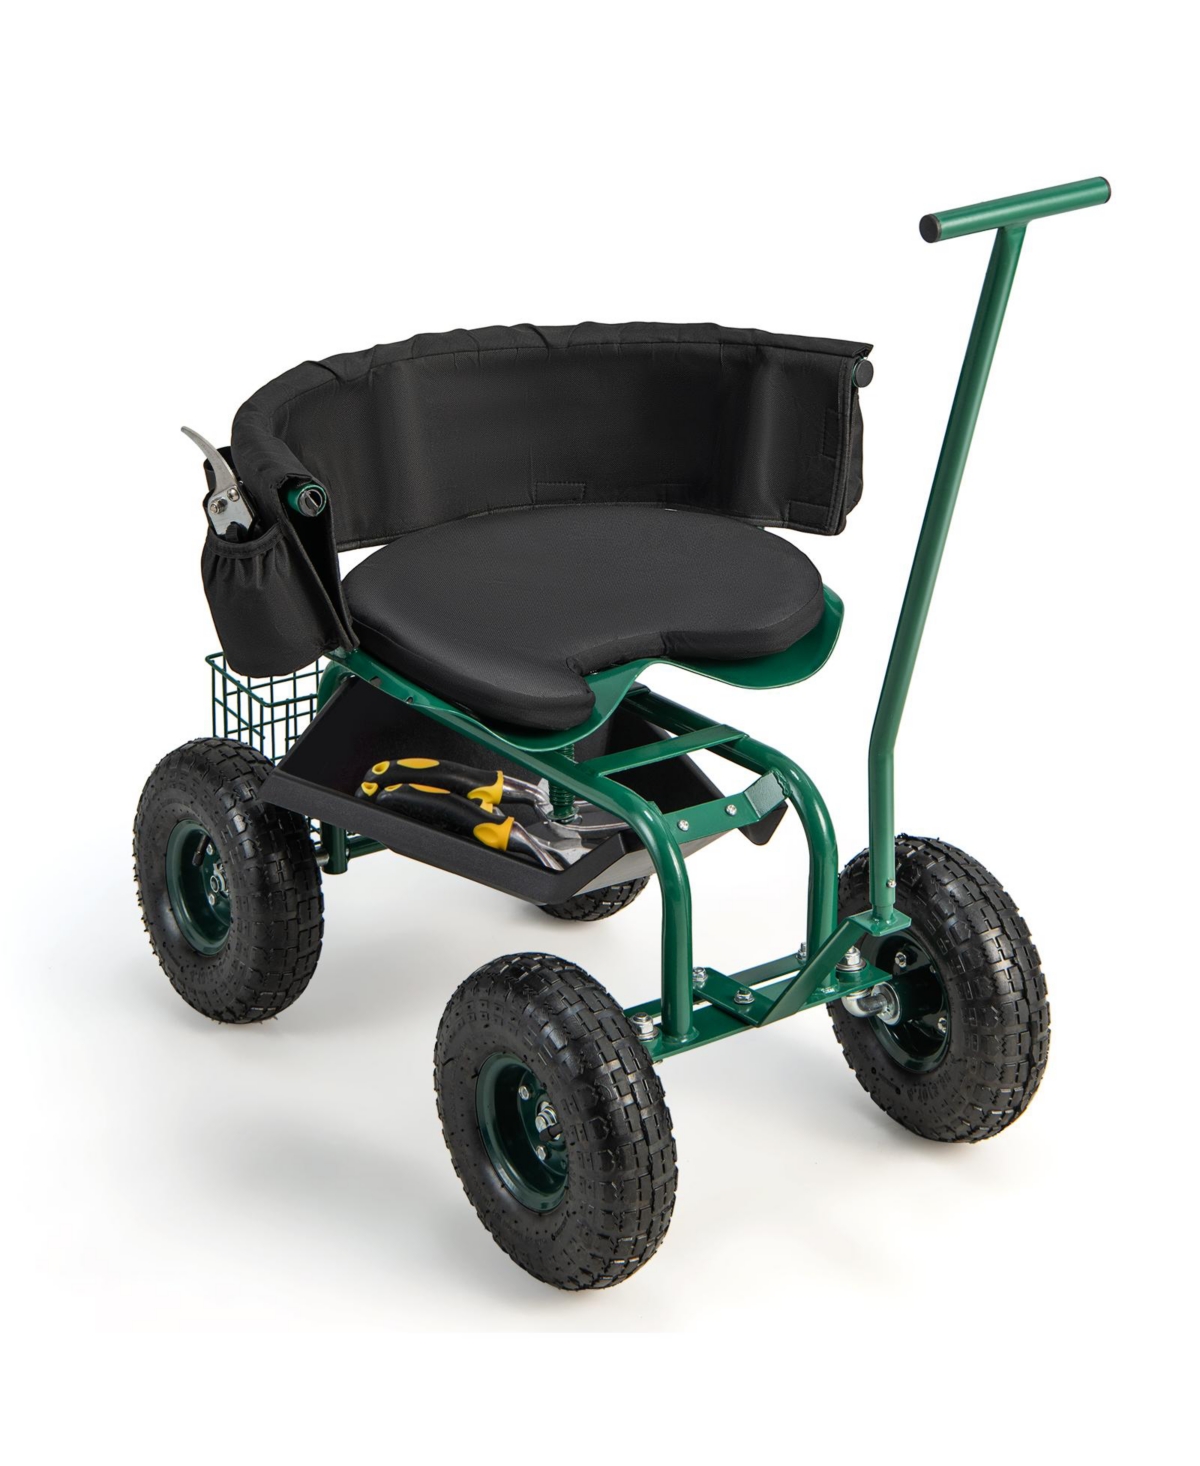 Rolling Garden Cart with Height Adjustable Swivel Seat and Storage Basket-Green - Green